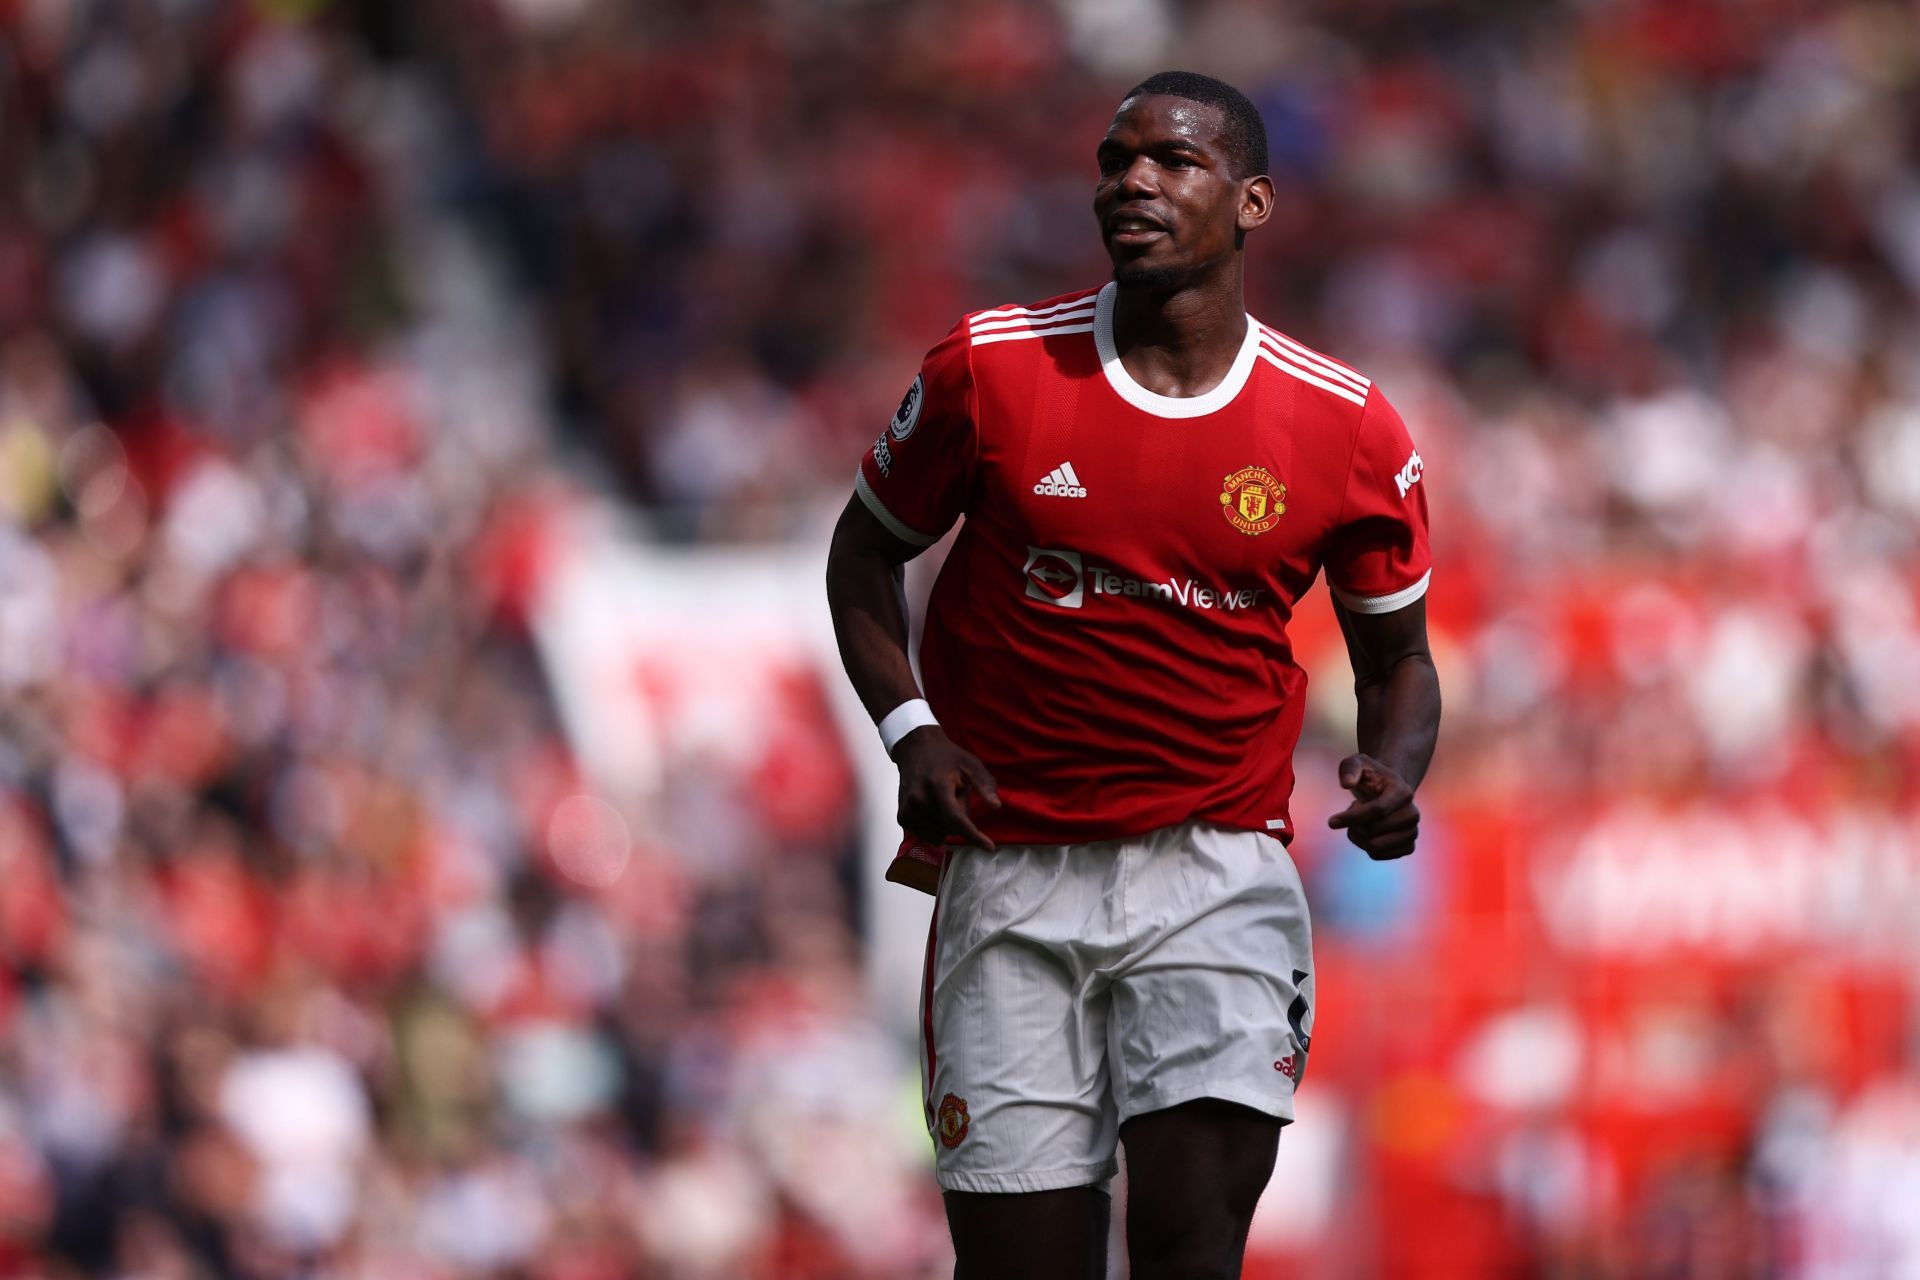 Pogba has been plagued by inconsistent displays